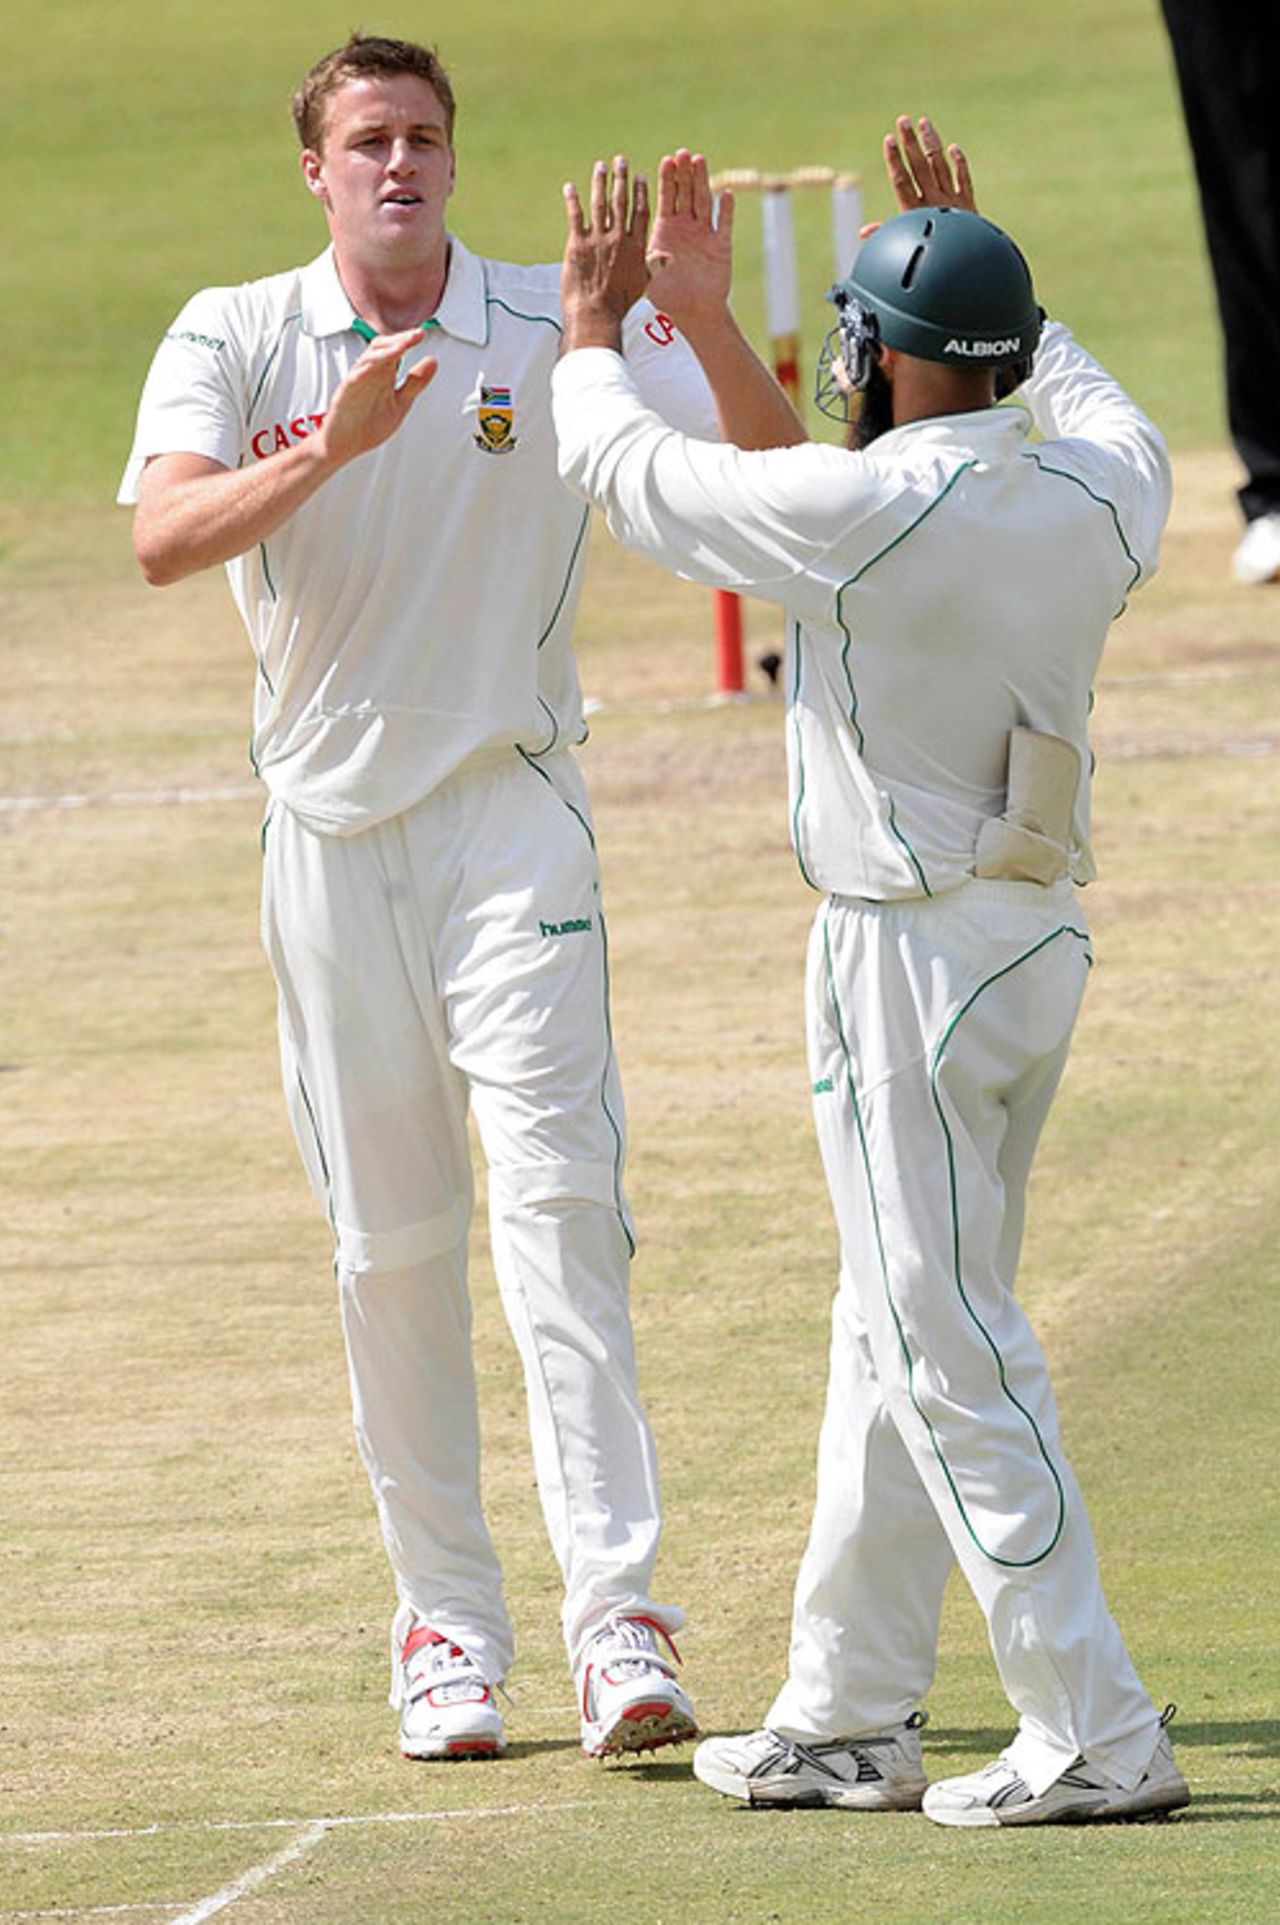 Morne Morkel claims another wicket as Bangladesh crumble, South Africa v Bangladesh, 1st Test, Bloemfontein, November 20, 2008